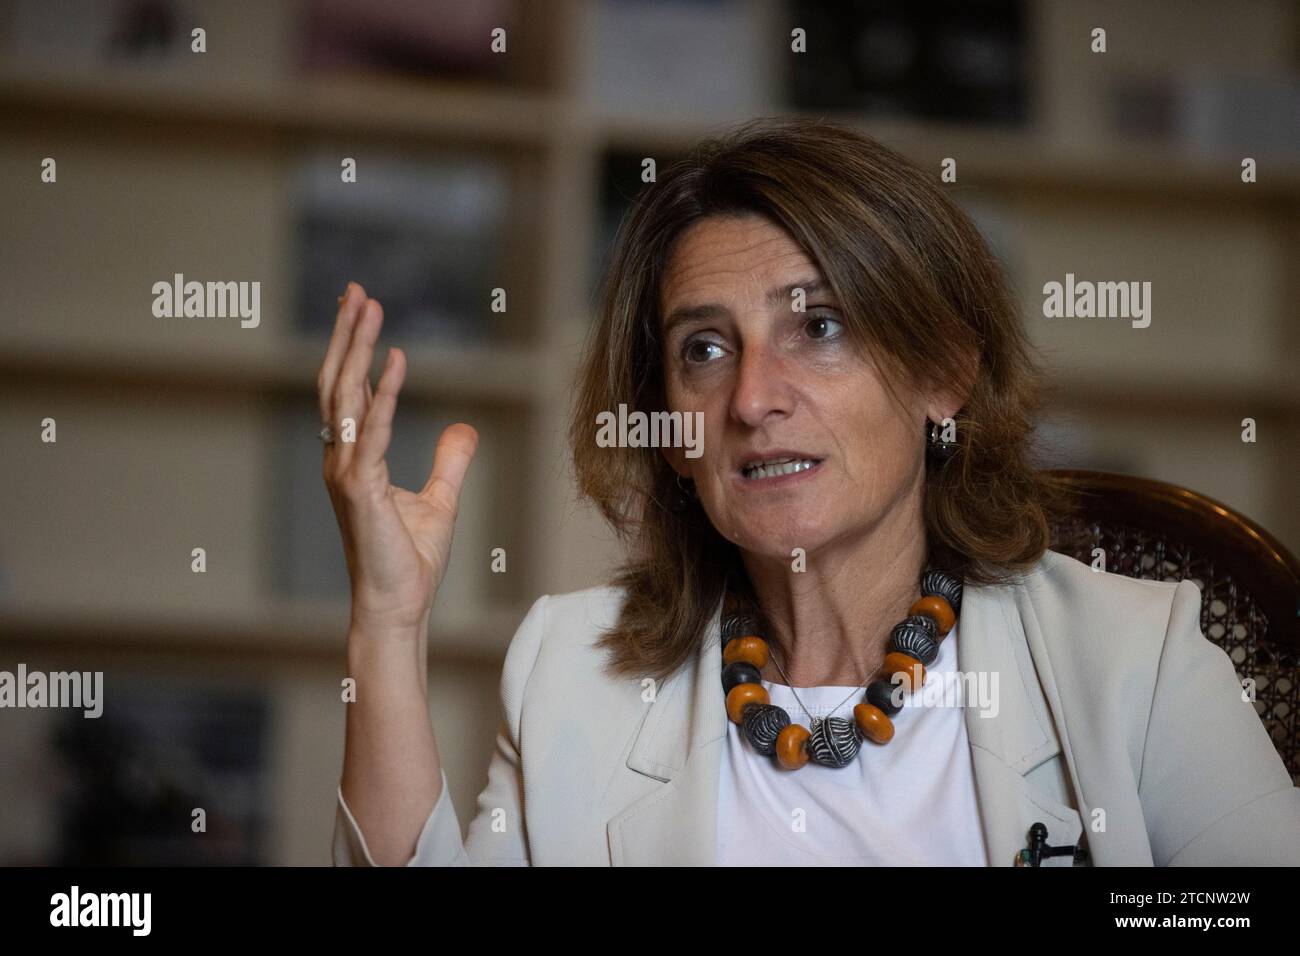 Madrid, 10/27/2022. Interview with Teresa Ribera, third vice president and minister for the Ecological Transition and the Demographic Challenge. Photo: Ángel de Antonio. ARCHDC. Credit: Album / Archivo ABC / Ángel de Antonio Stock Photo